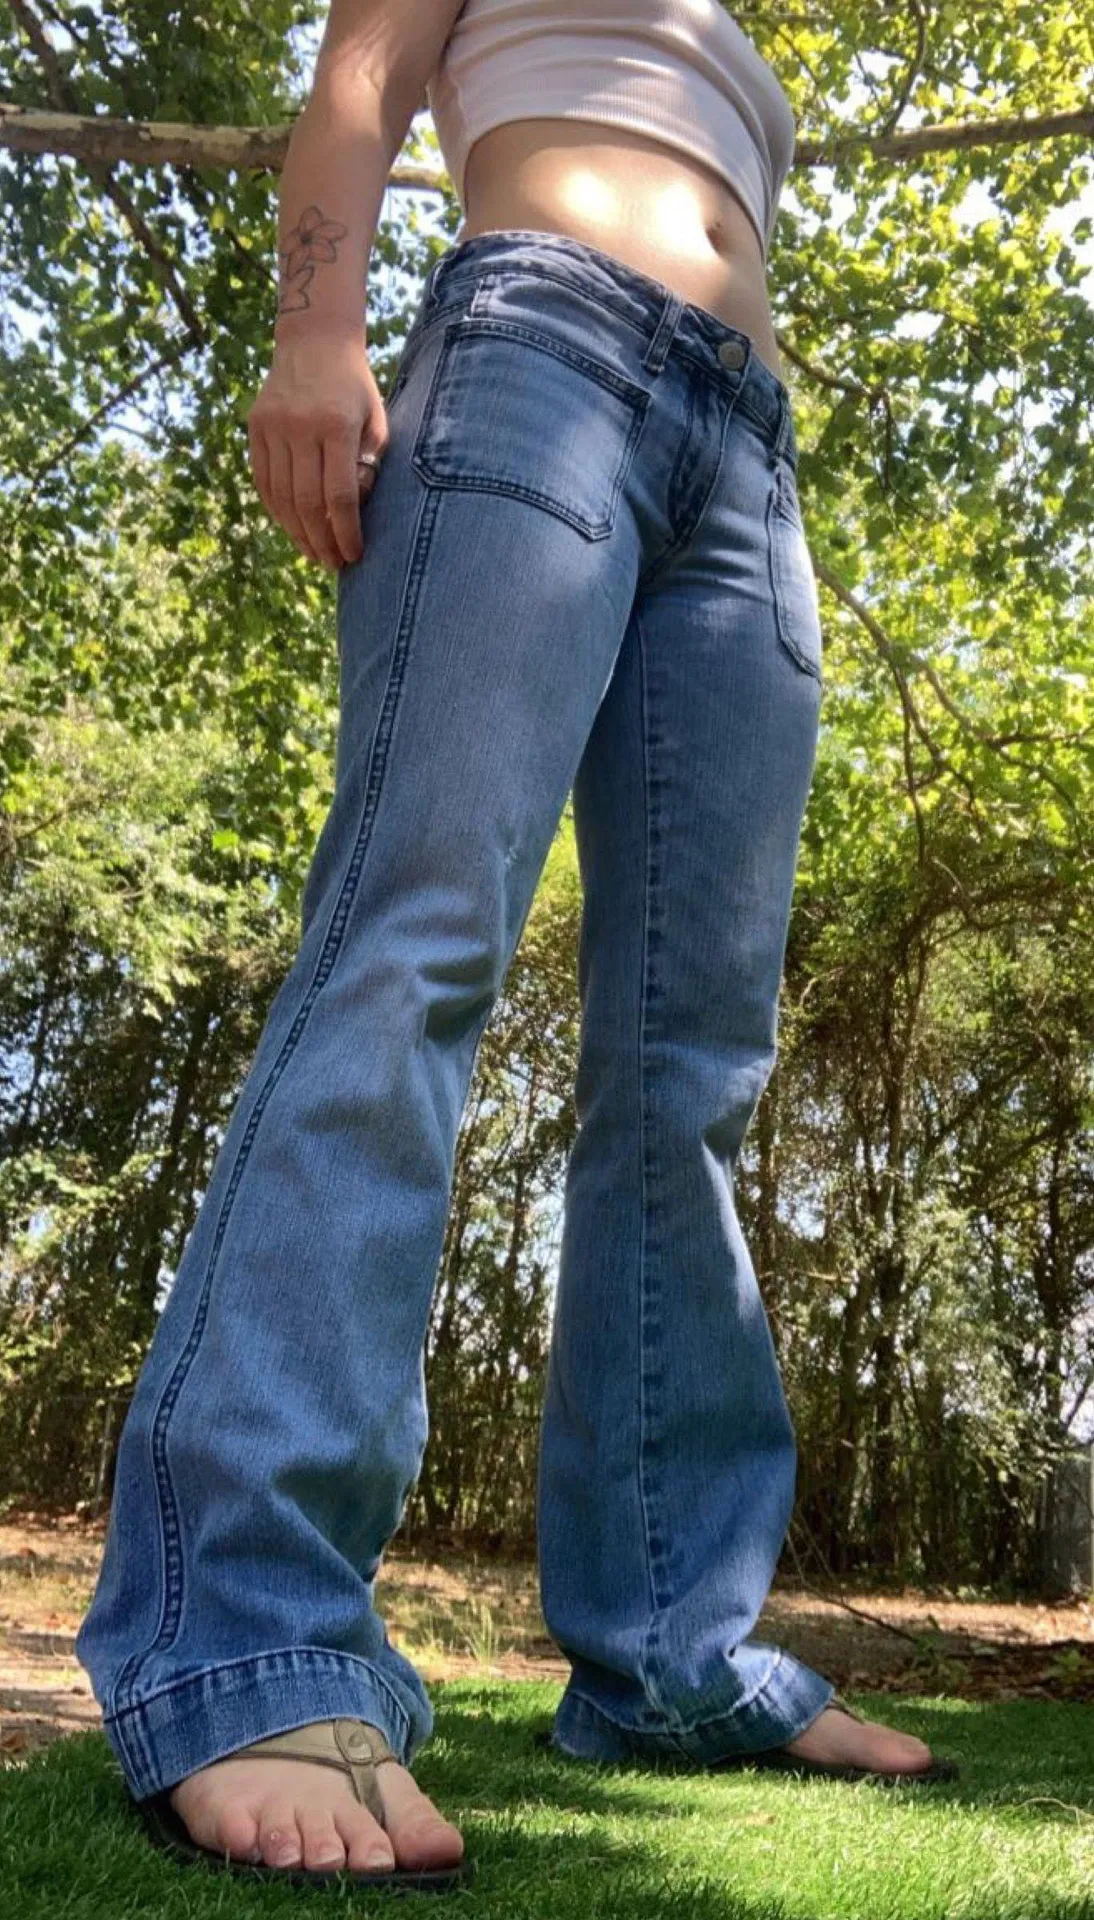 Sexy ass in tight jeans - Life With a Jeans Fetish